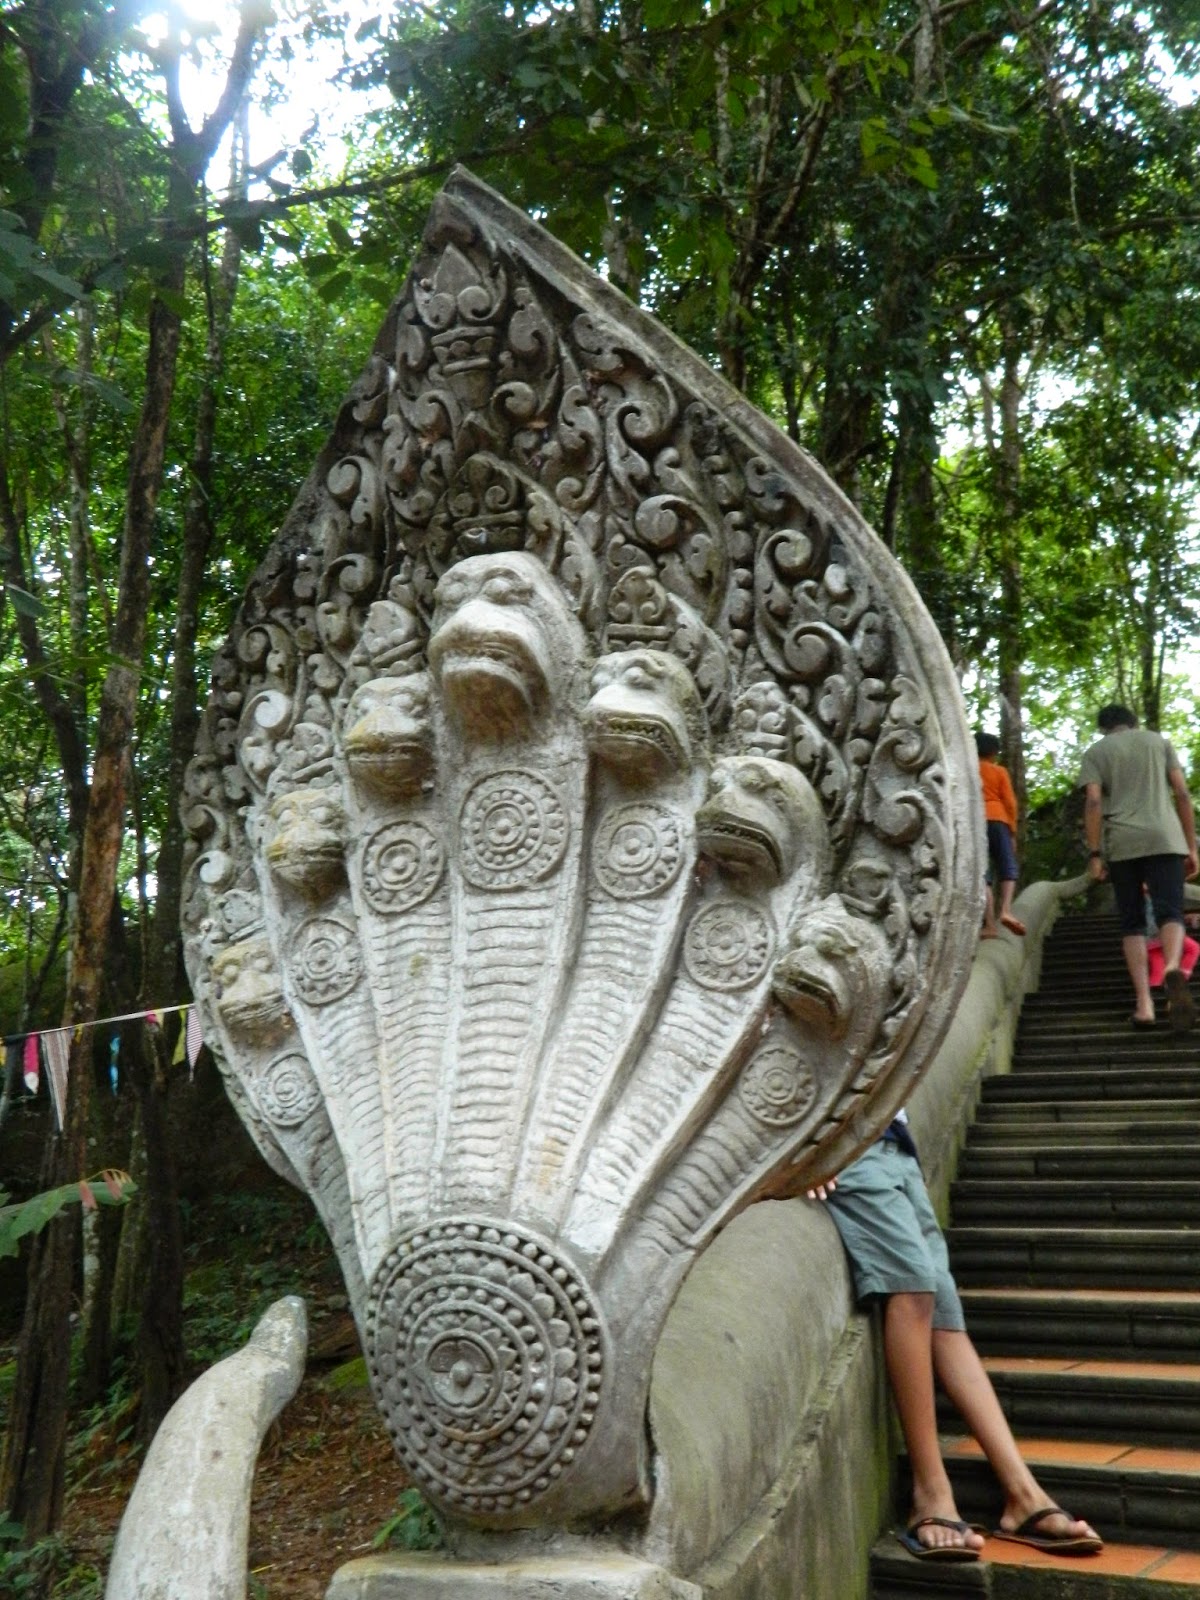 Naga - the mighty snake depicted almost everywhere in the place of handails in Cambodia